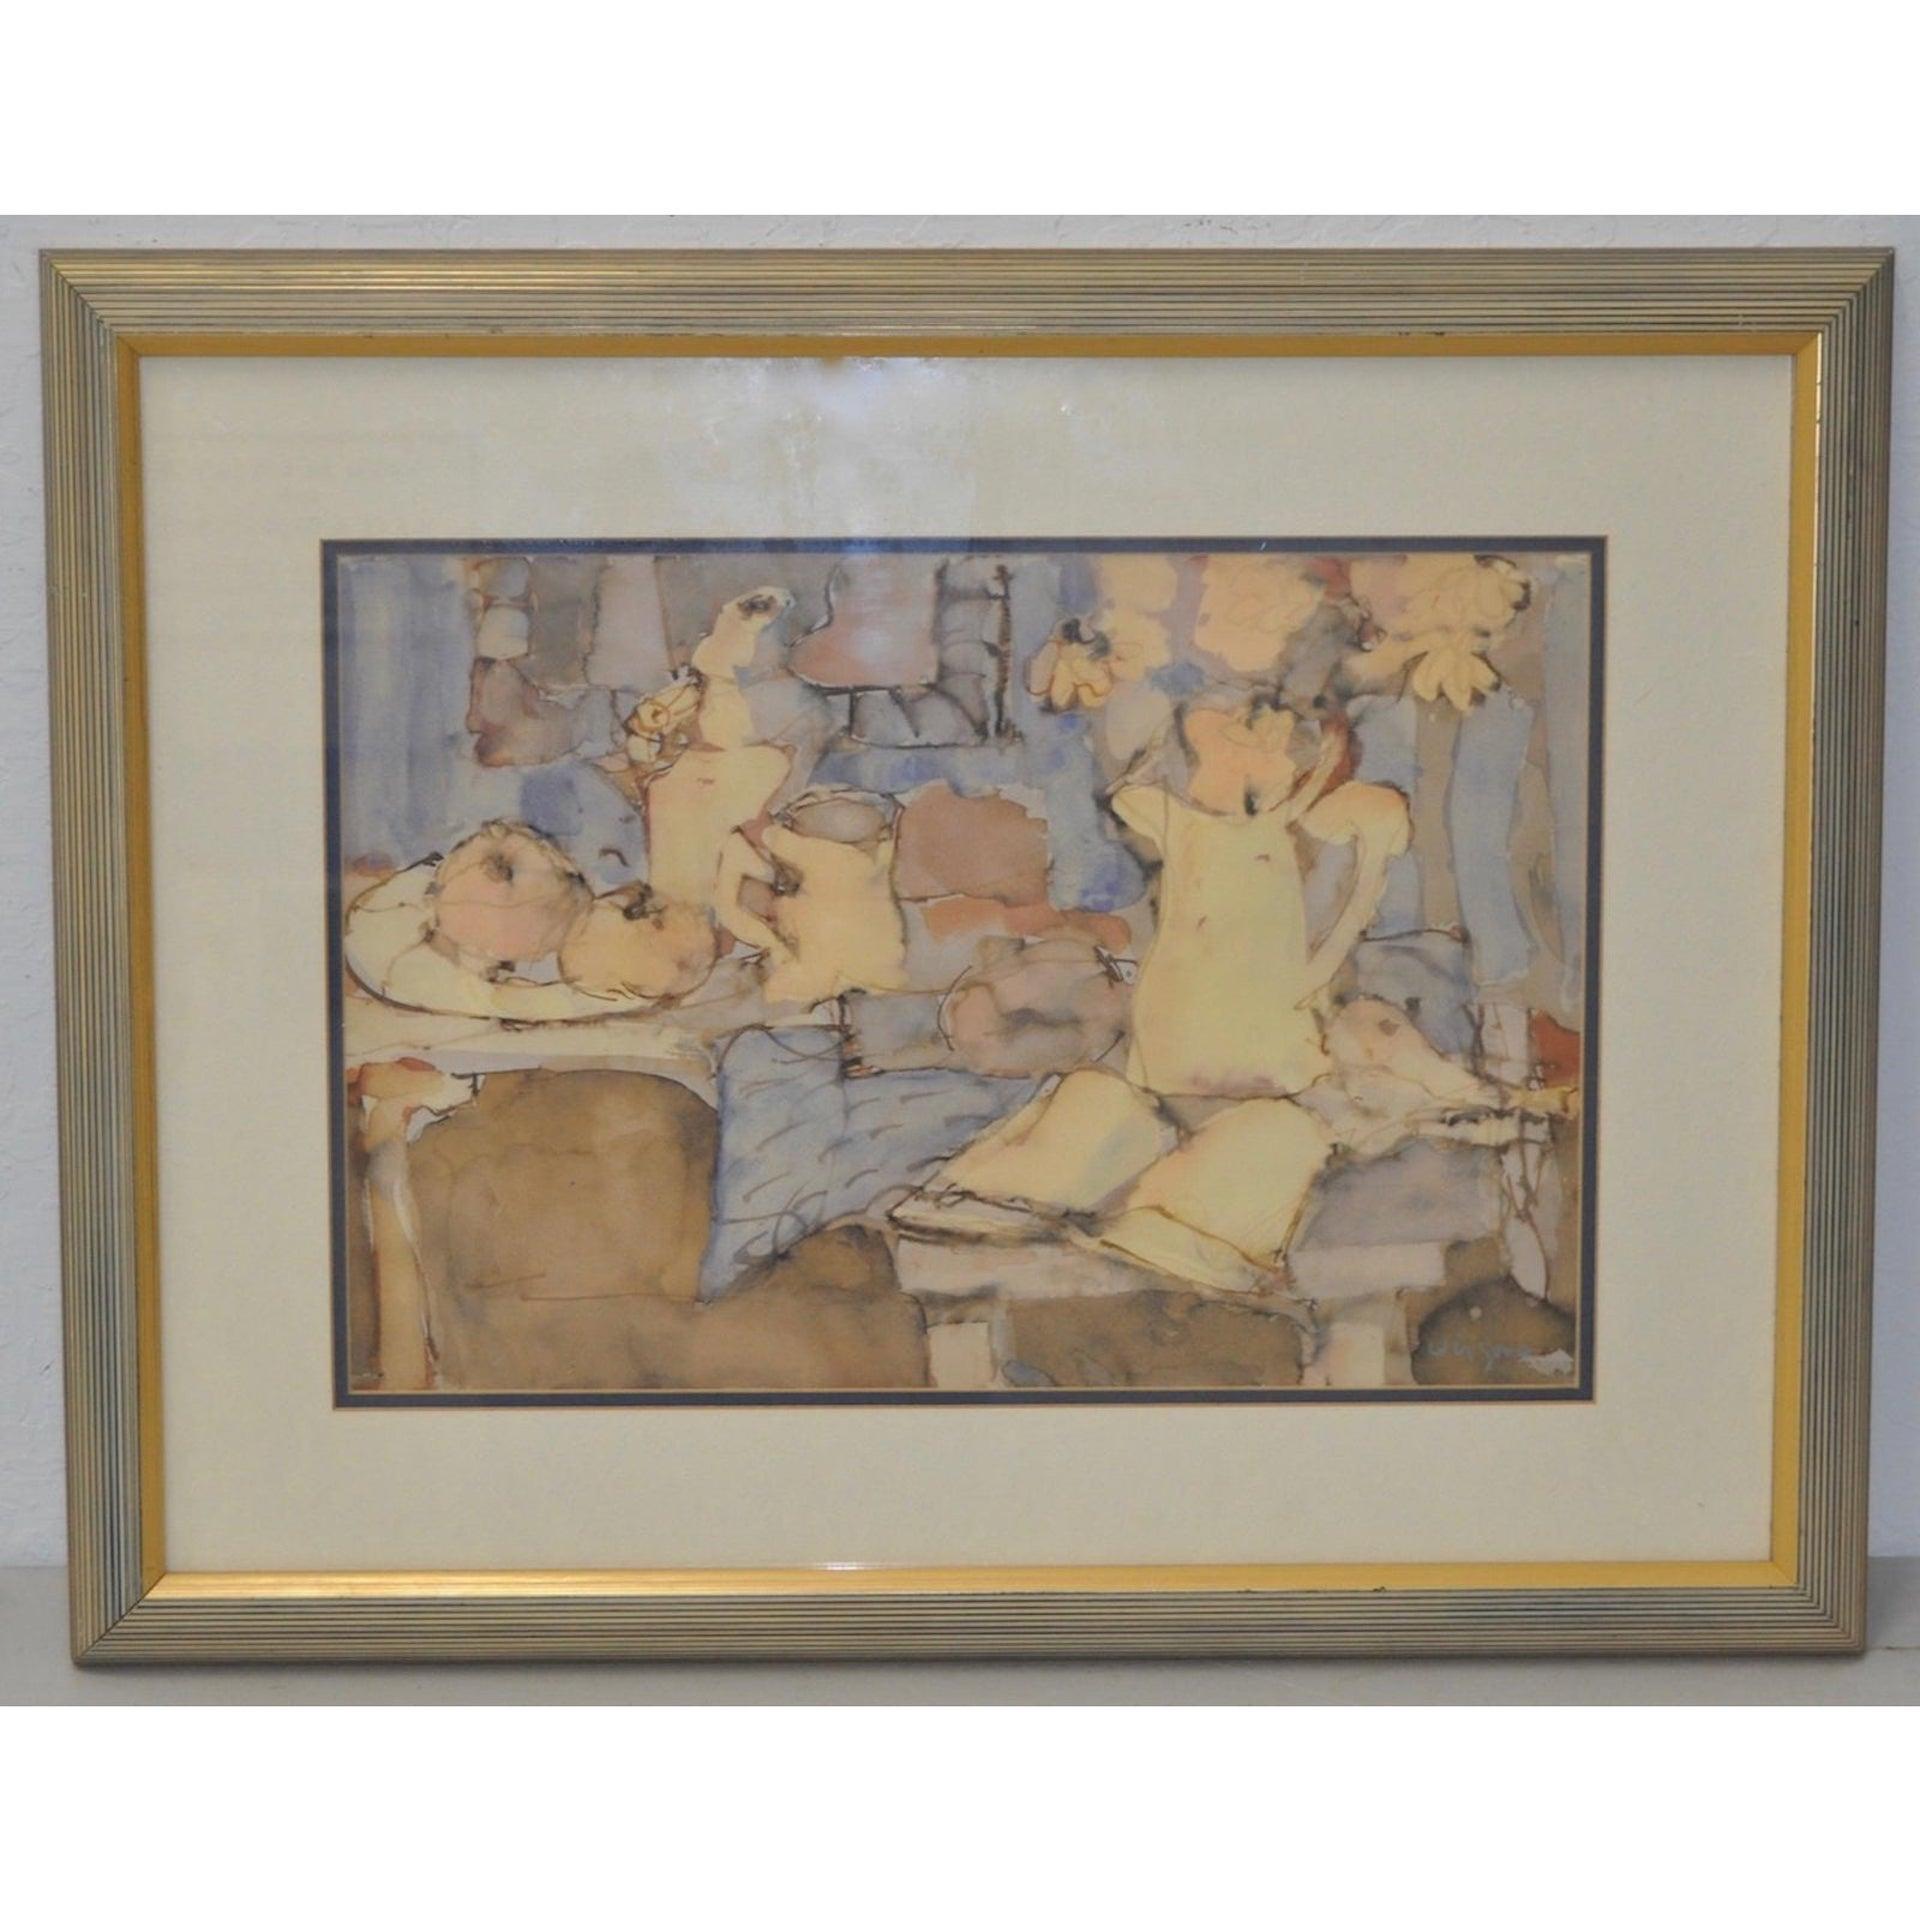 Abstract Still Life Watercolor Painting by Hang Virgona (1929-2019)

Beautiful original watercolor painting. The painting is signed.

Dimensions 18 1/2